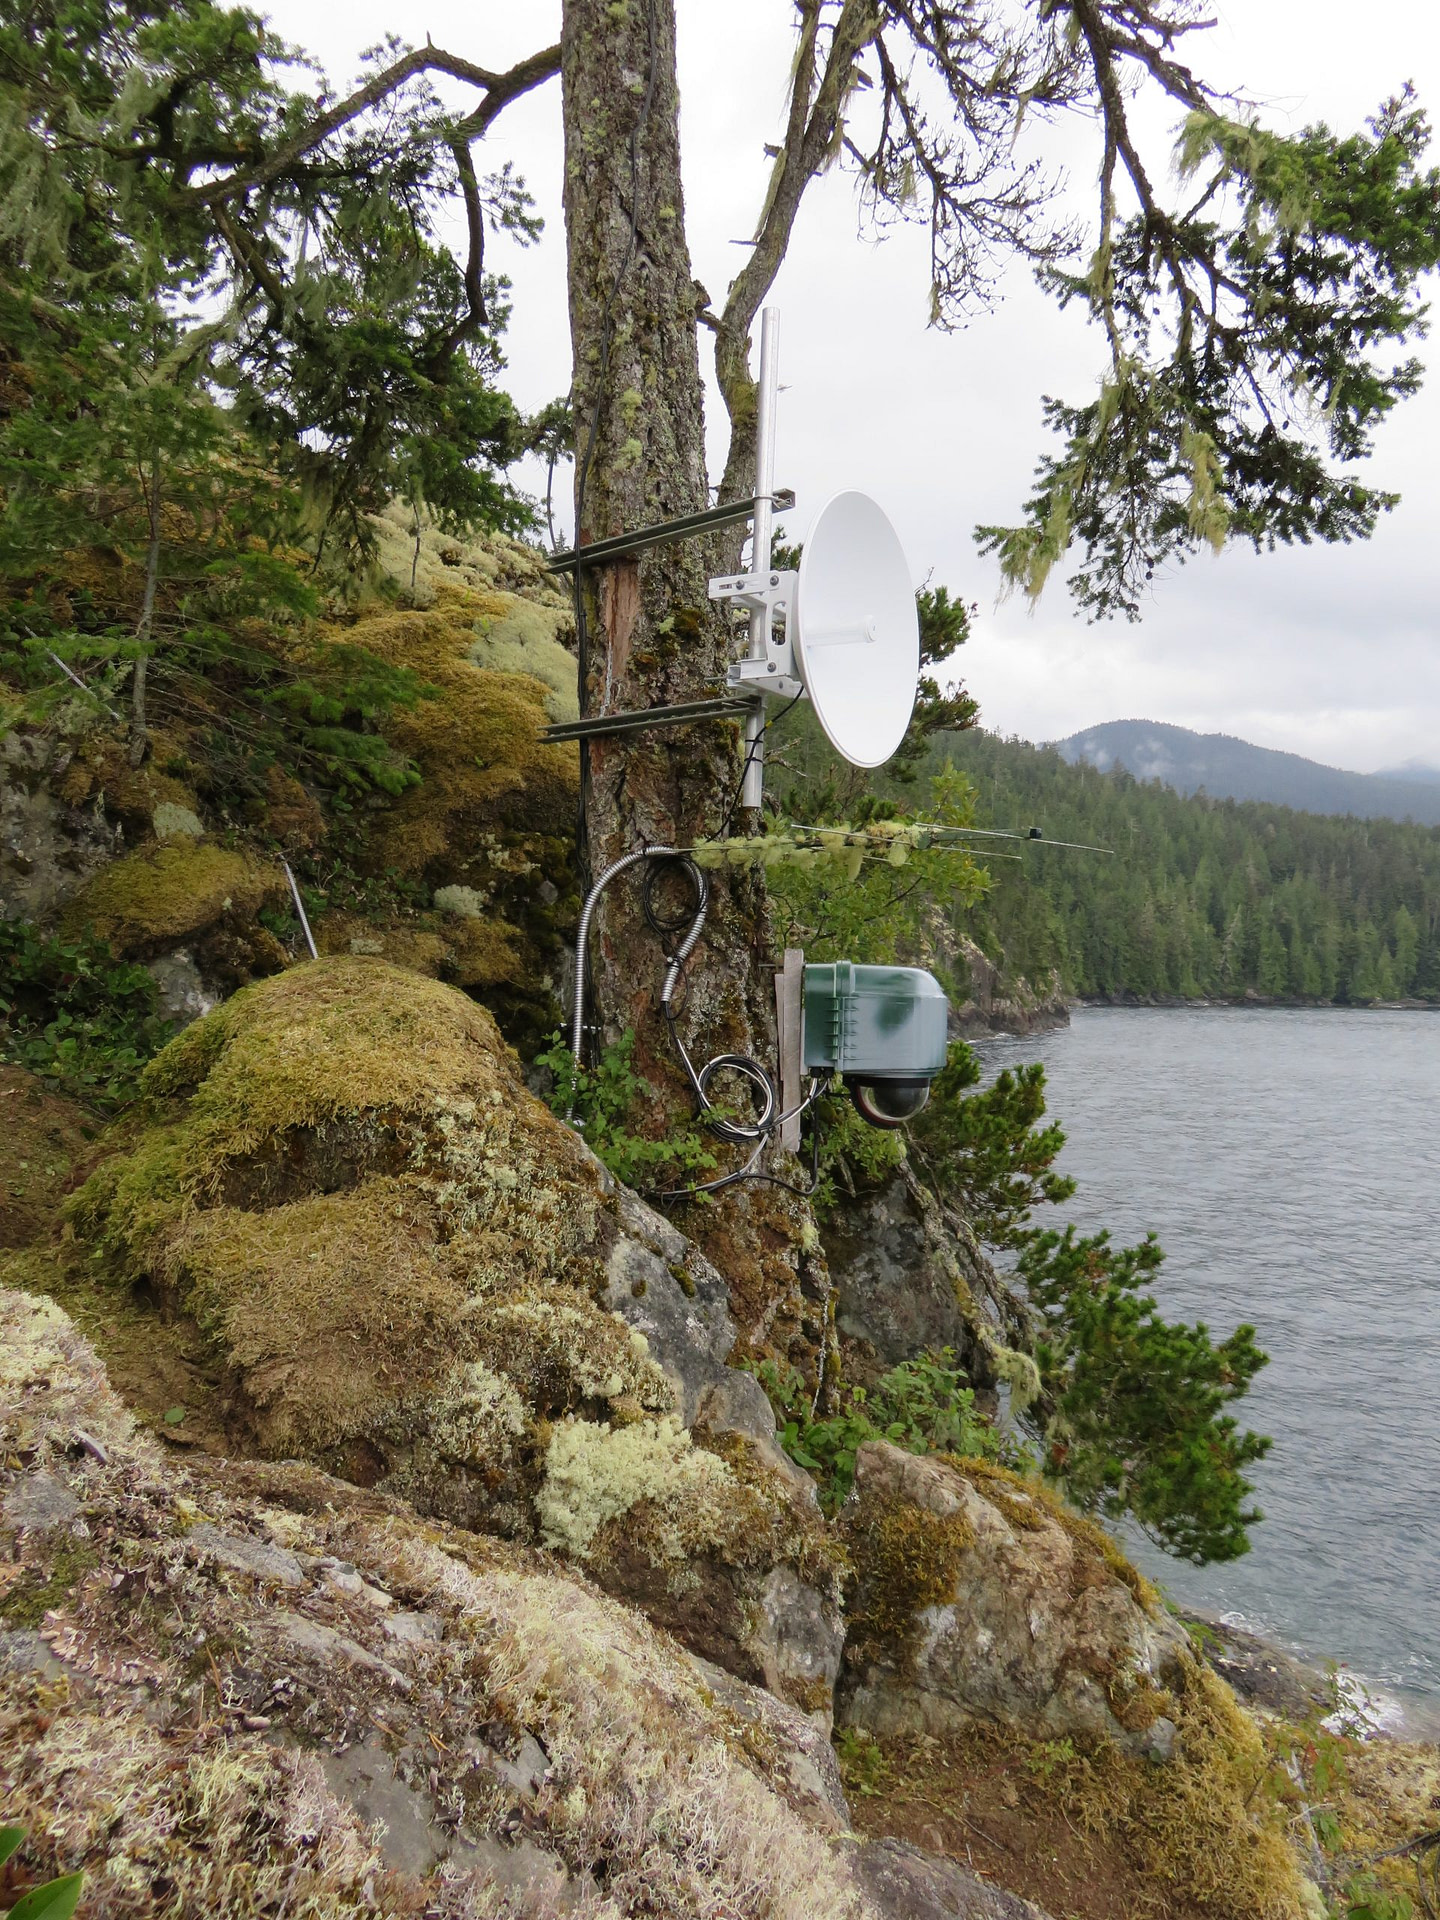 XRain Self Wiping Camera Enclosure System Installed At Critical Point Overlooking Resident Orcas In Robson Bight Ecological Reserve In BC Canada 